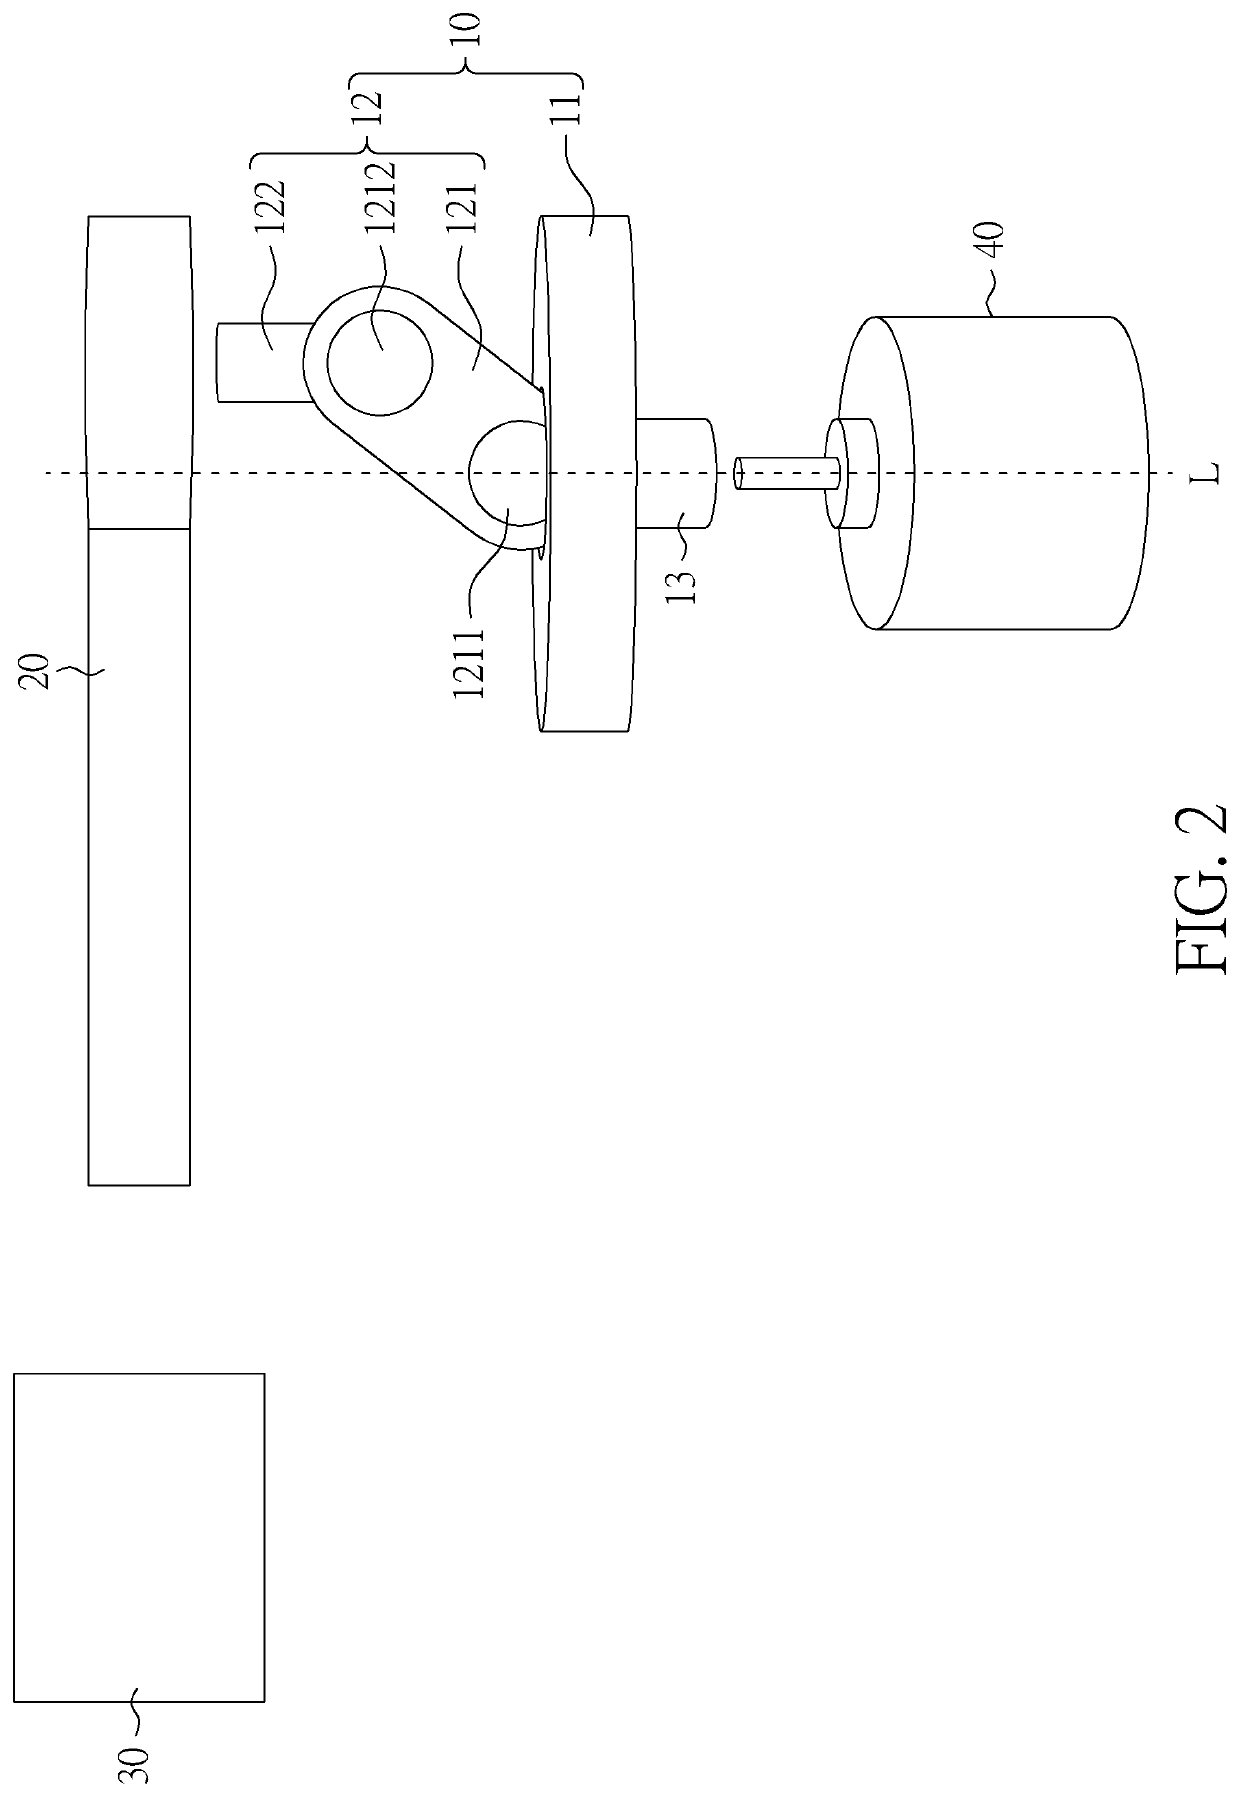 Linear driving mechanism with variable stroke varied by a slanted moving shaft